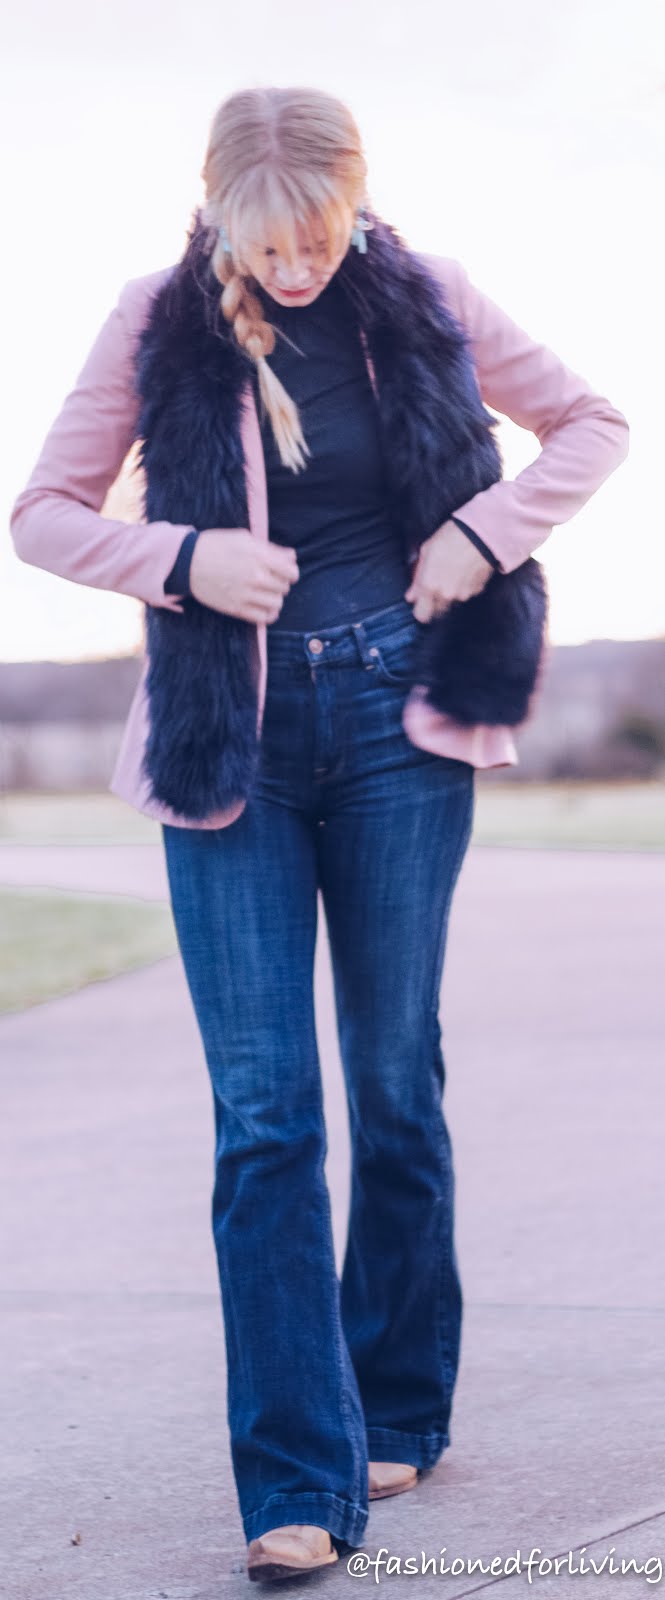 womens cowboy boots and jeans outfit with blush blazer and fur stole